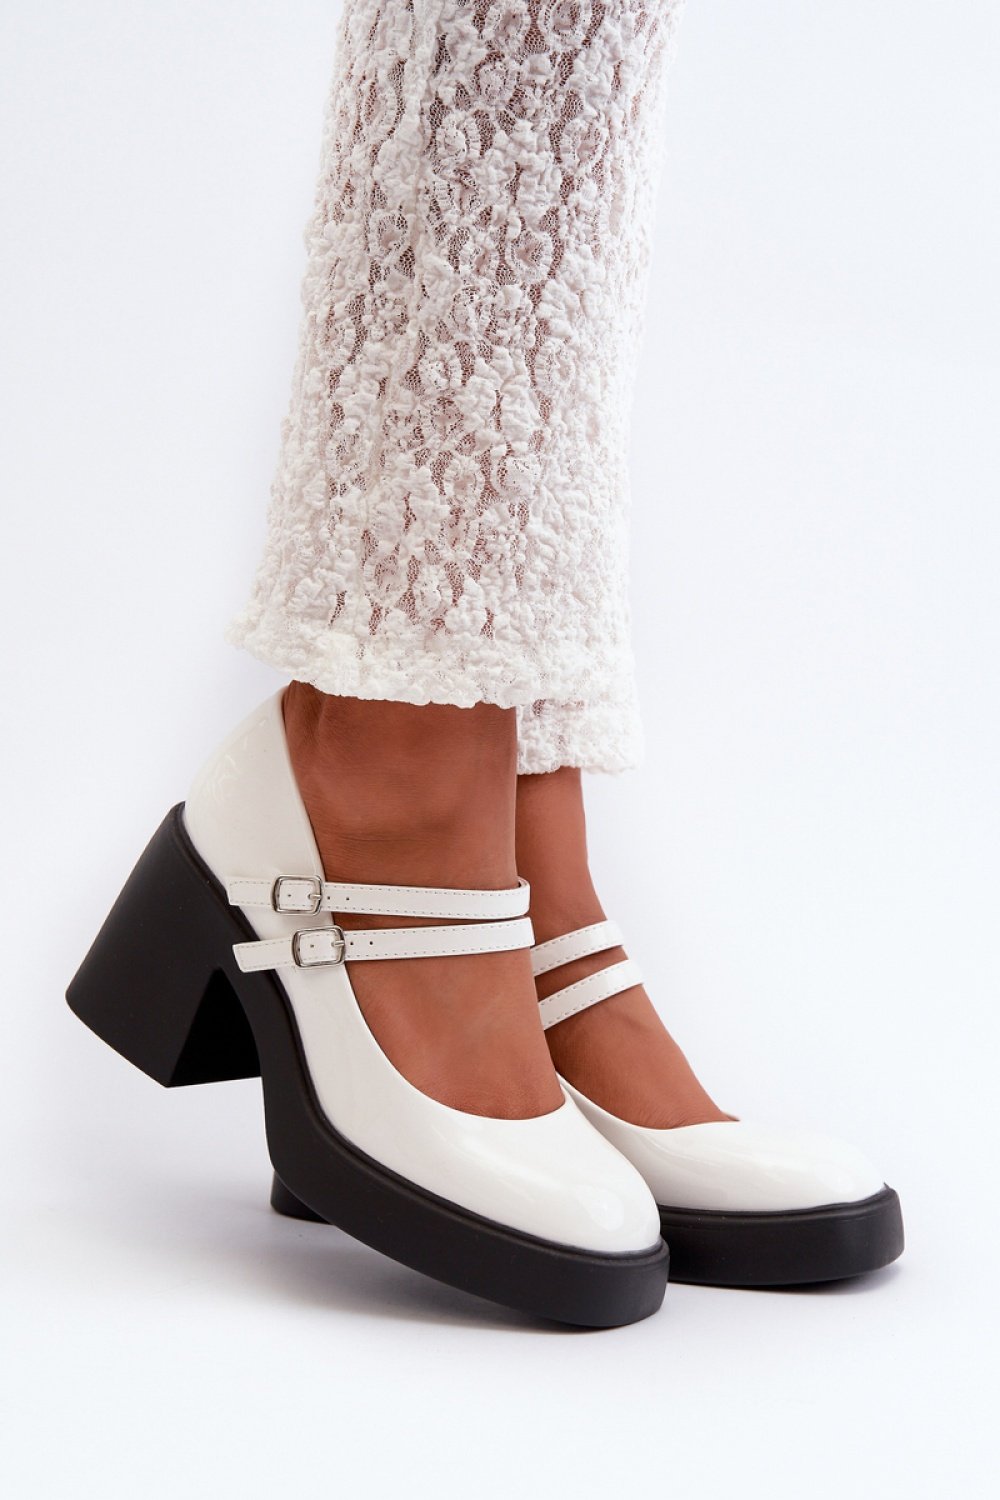  Heel pumps model 198520 Step in style  white